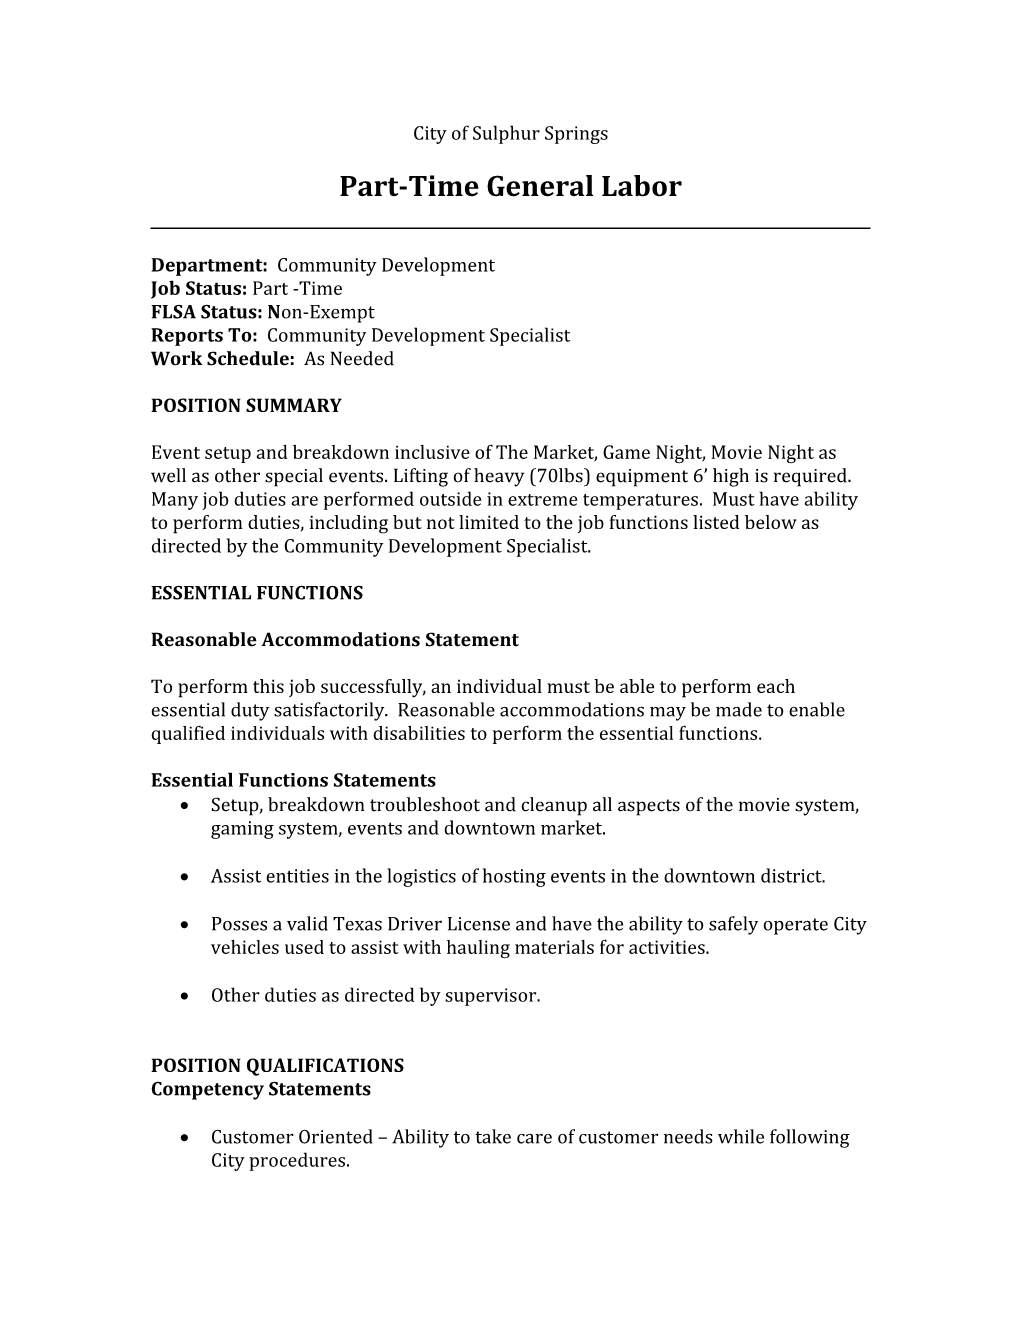 Part-Time General Labor